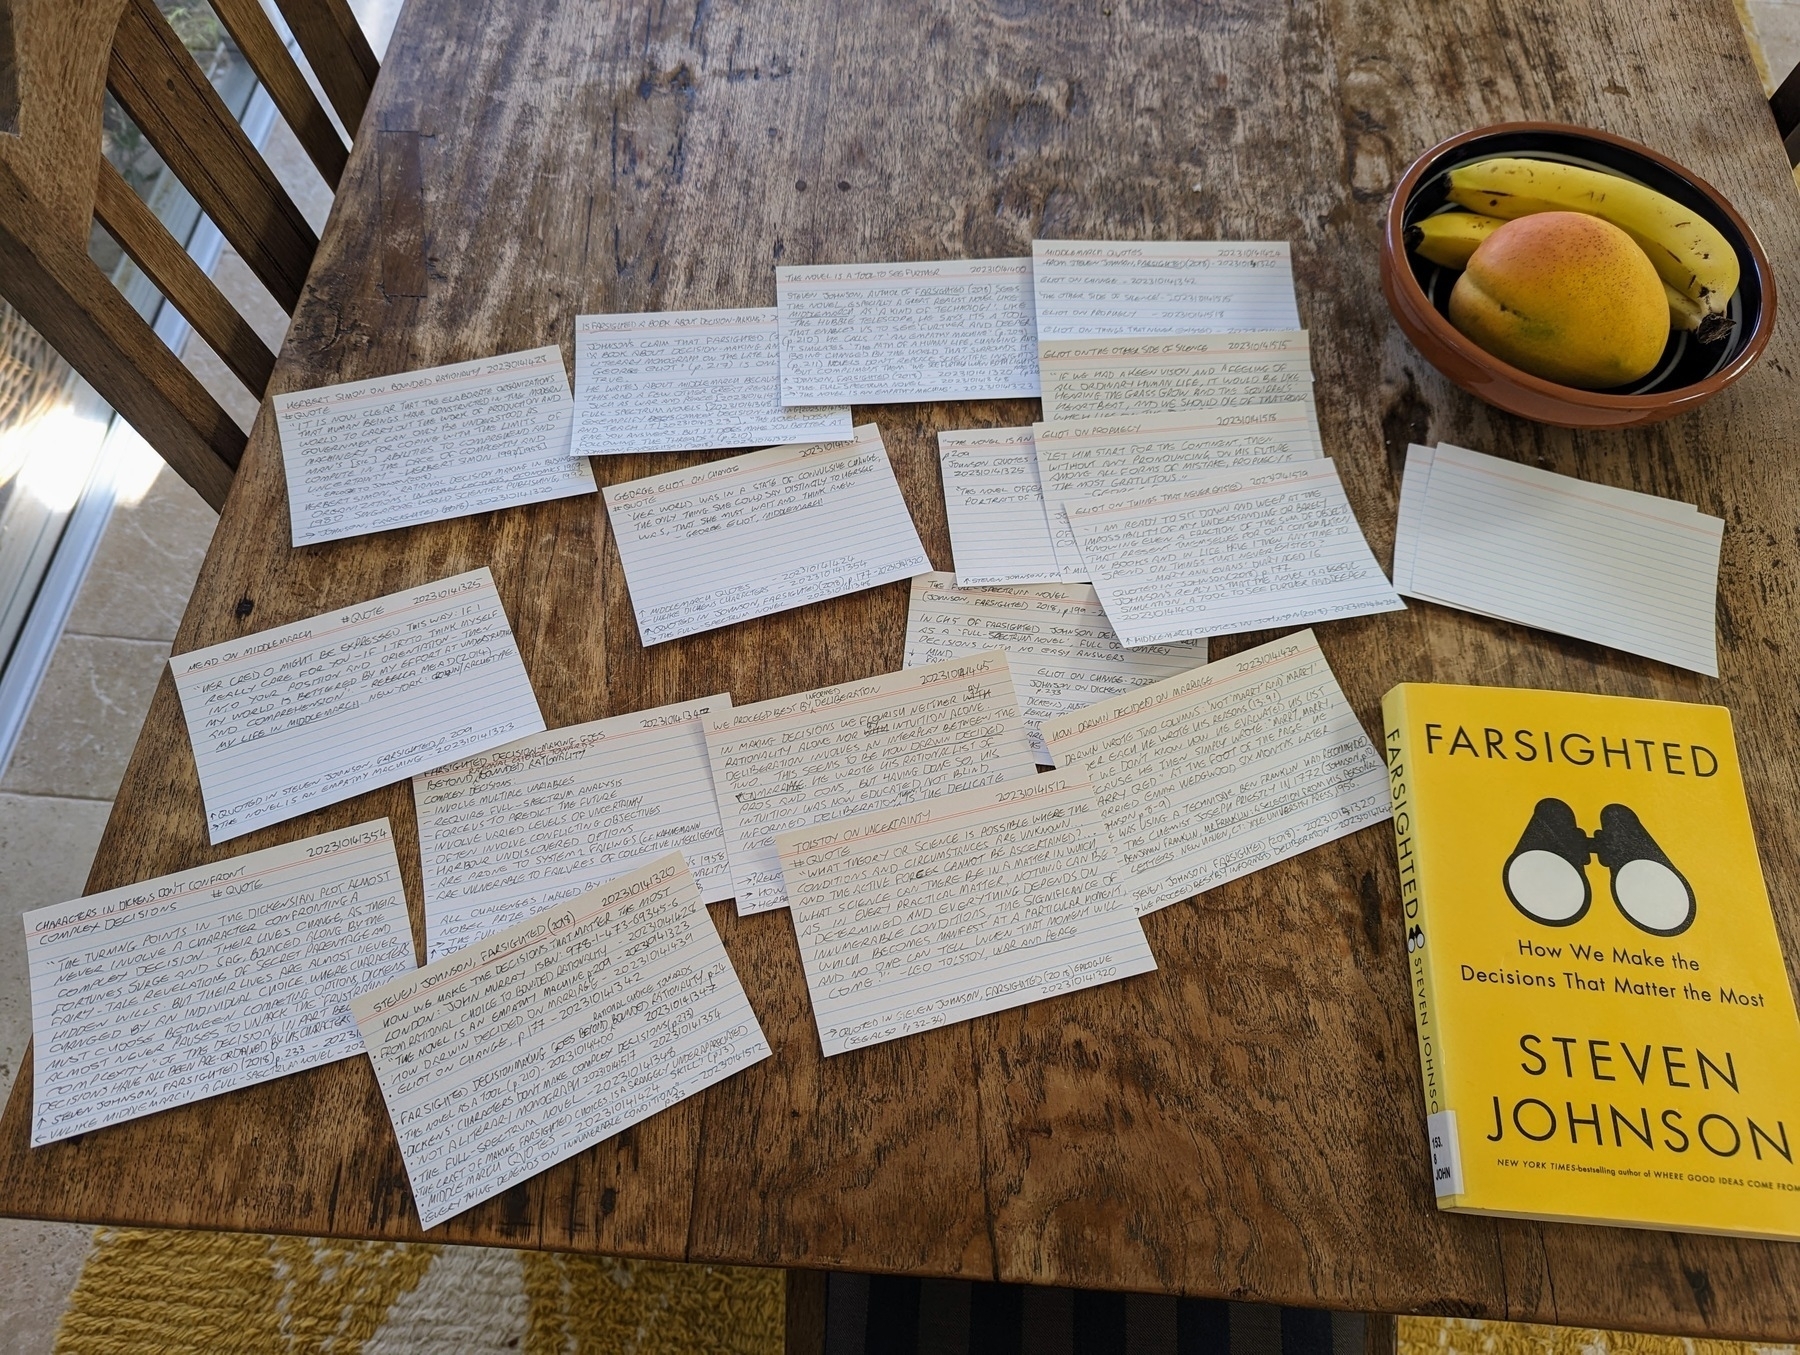 The book Farsighted by Steven Johnson sits on a wooden table top. Beside it lies spread out a group of index cards with hand-written notes.